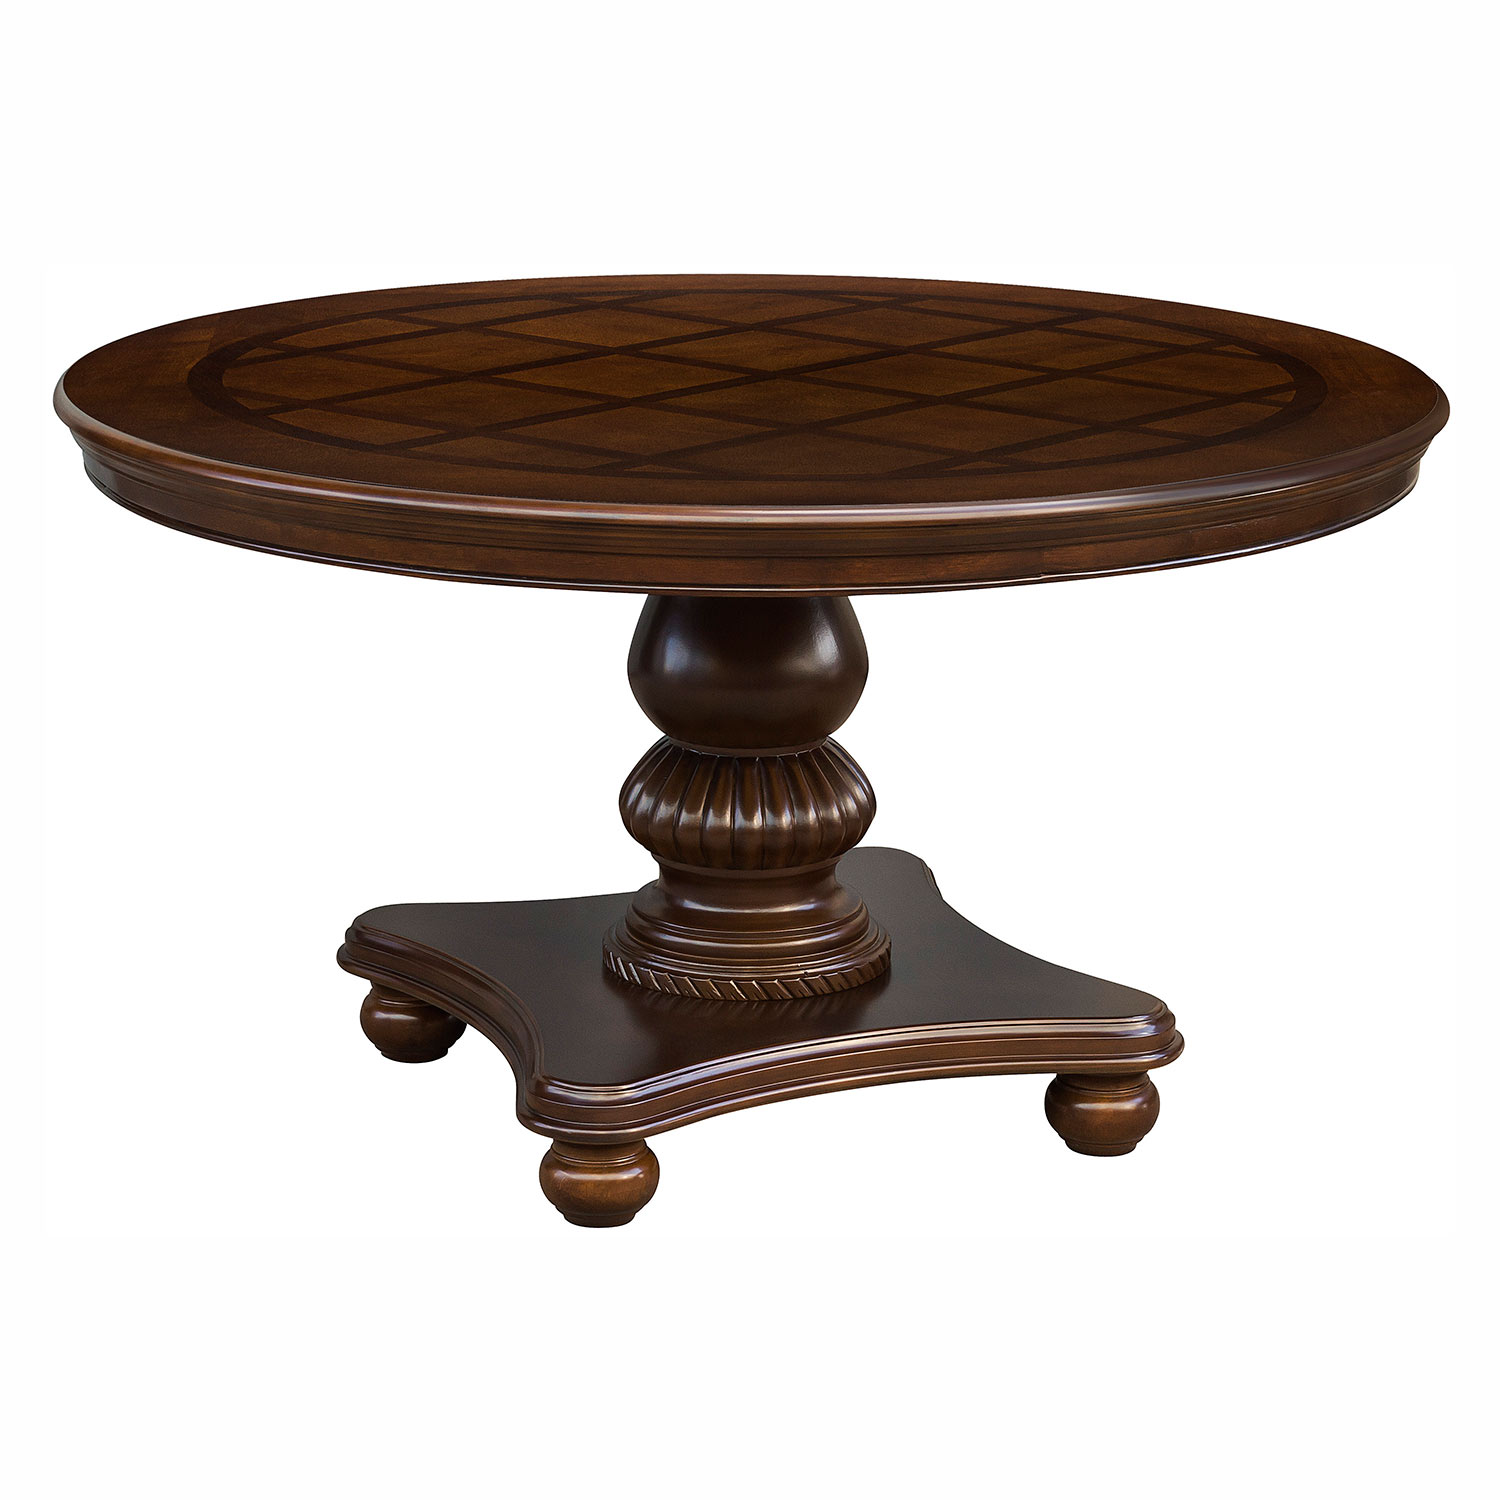 Homelegance Lordsburg Round Dining Table - Brown Cherry